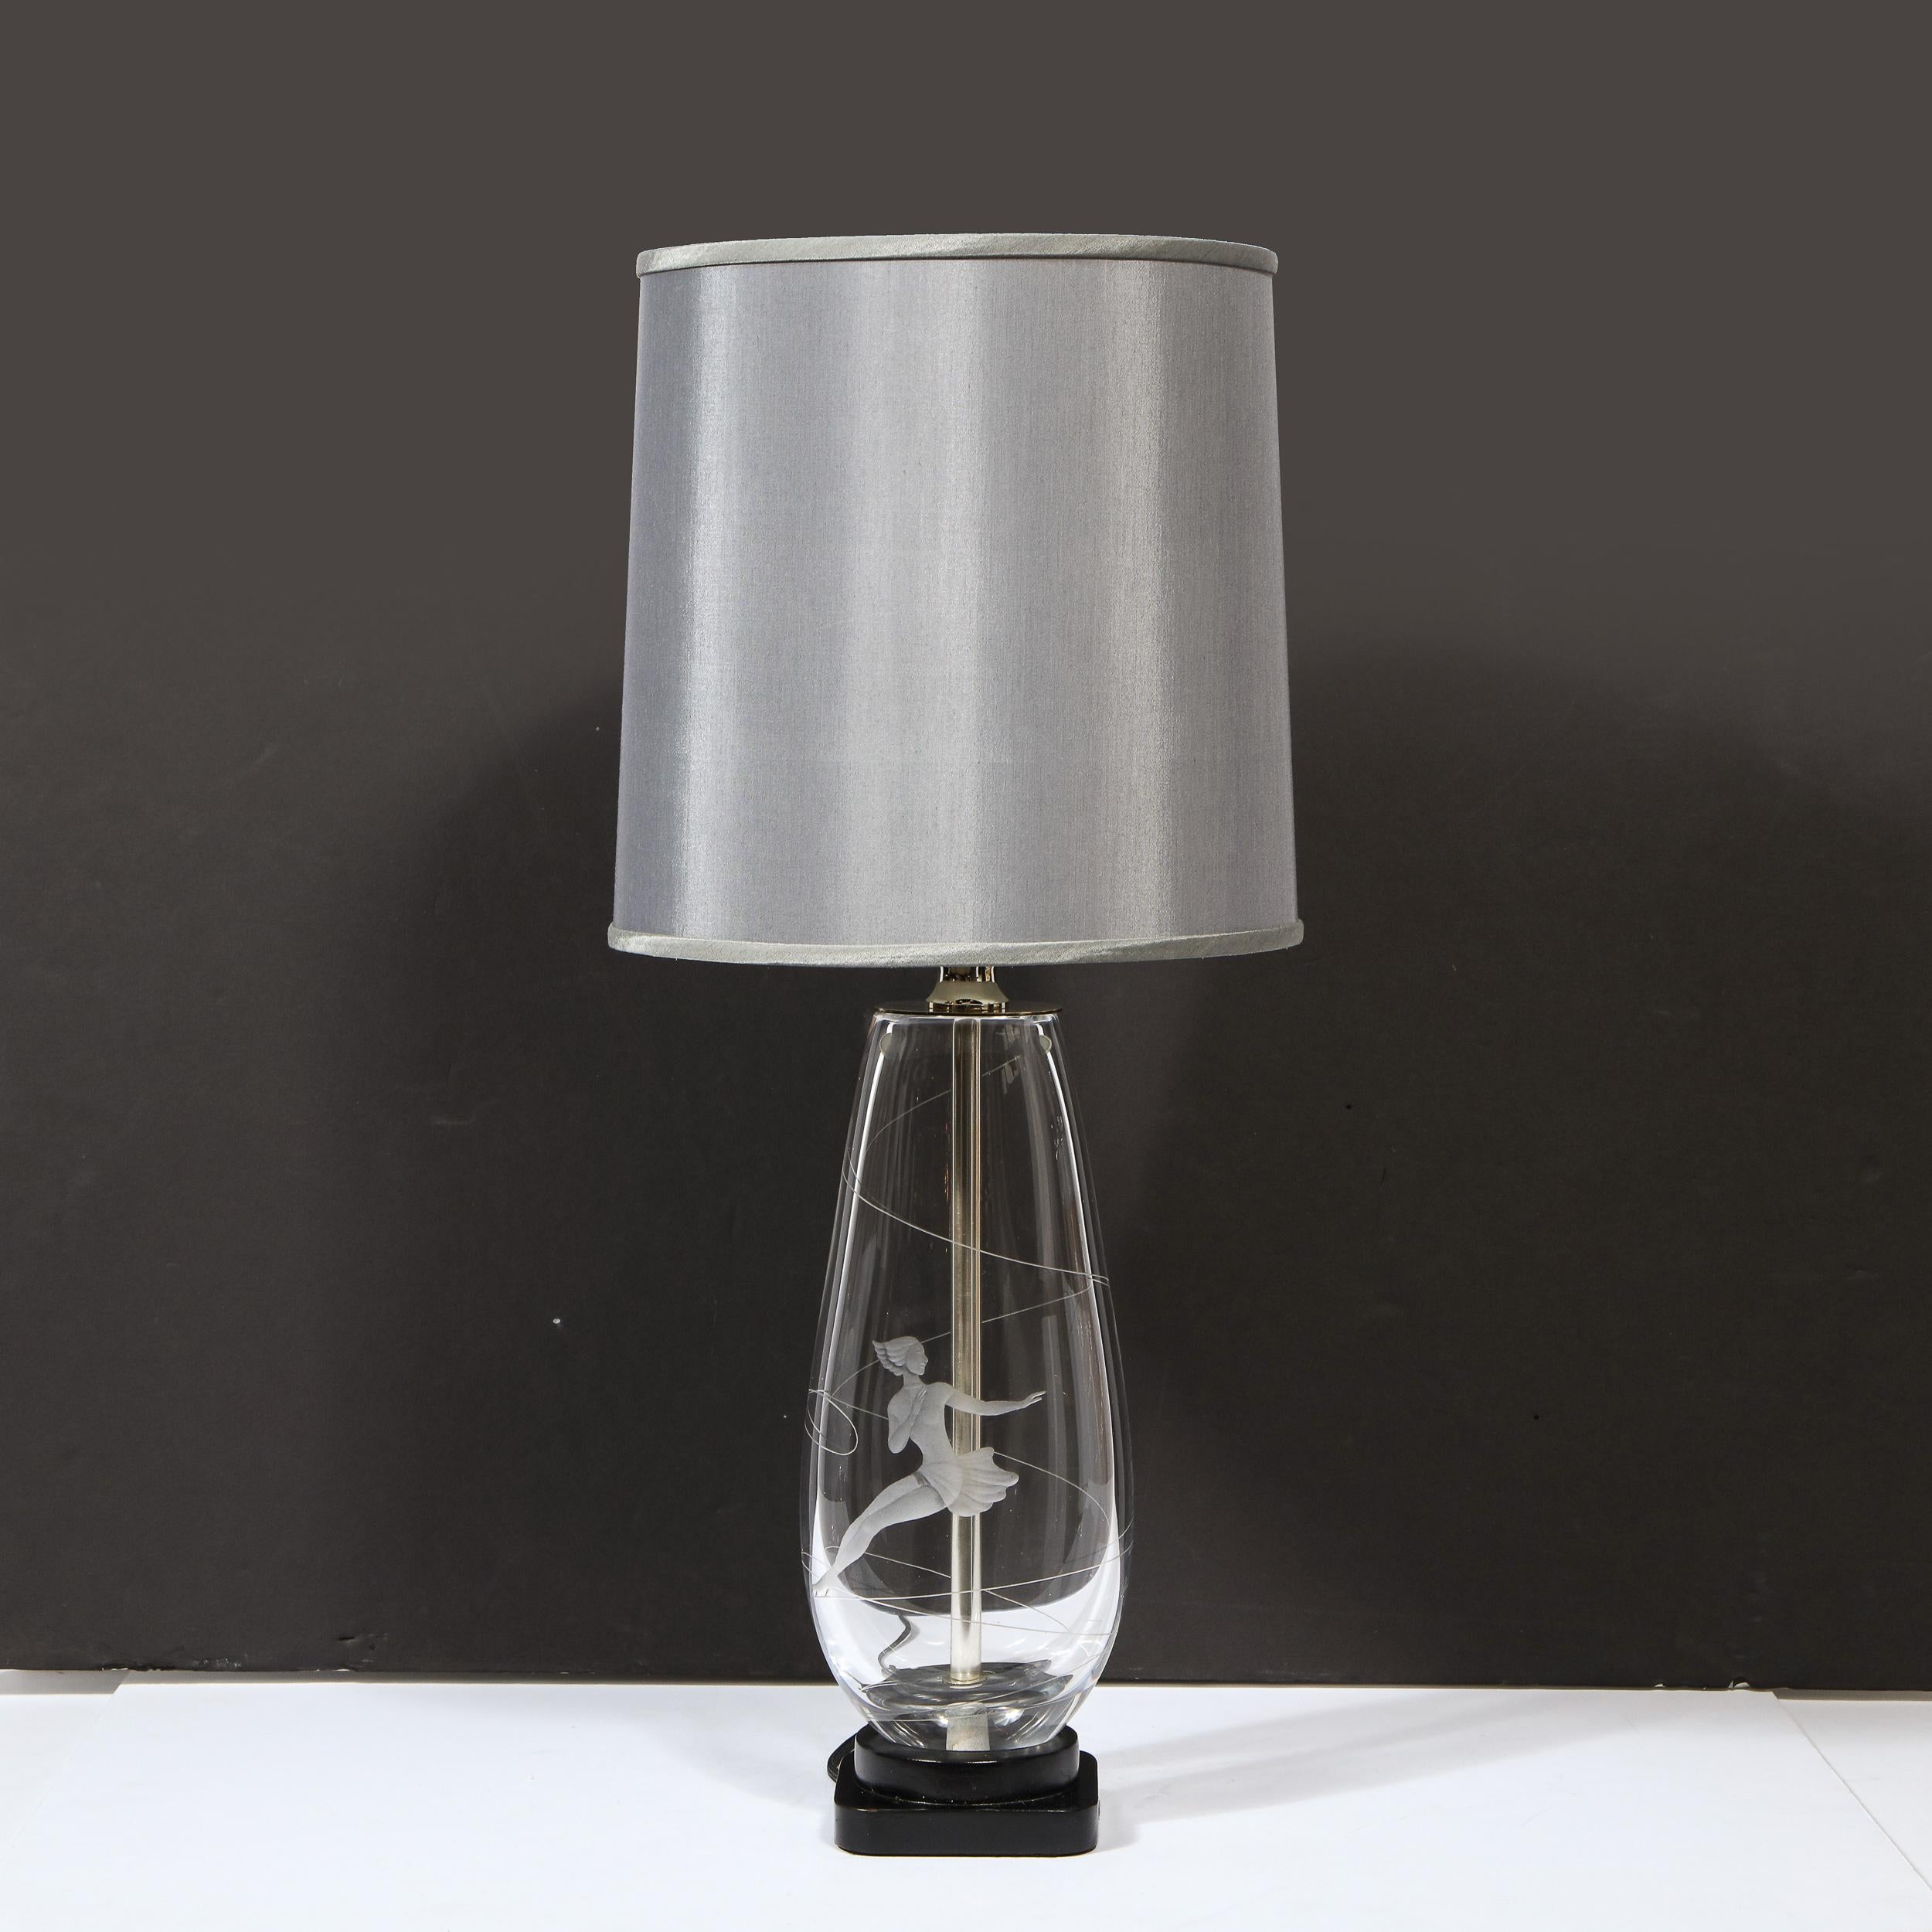 This elegant Mid-Century Modern table lamp was realized by the legendary maker Orrefors in Sweden, circa 1950. It features a cylindrical translucent glass body that tapers at its top sitting on a tiered square black enamel base with rounded edges.